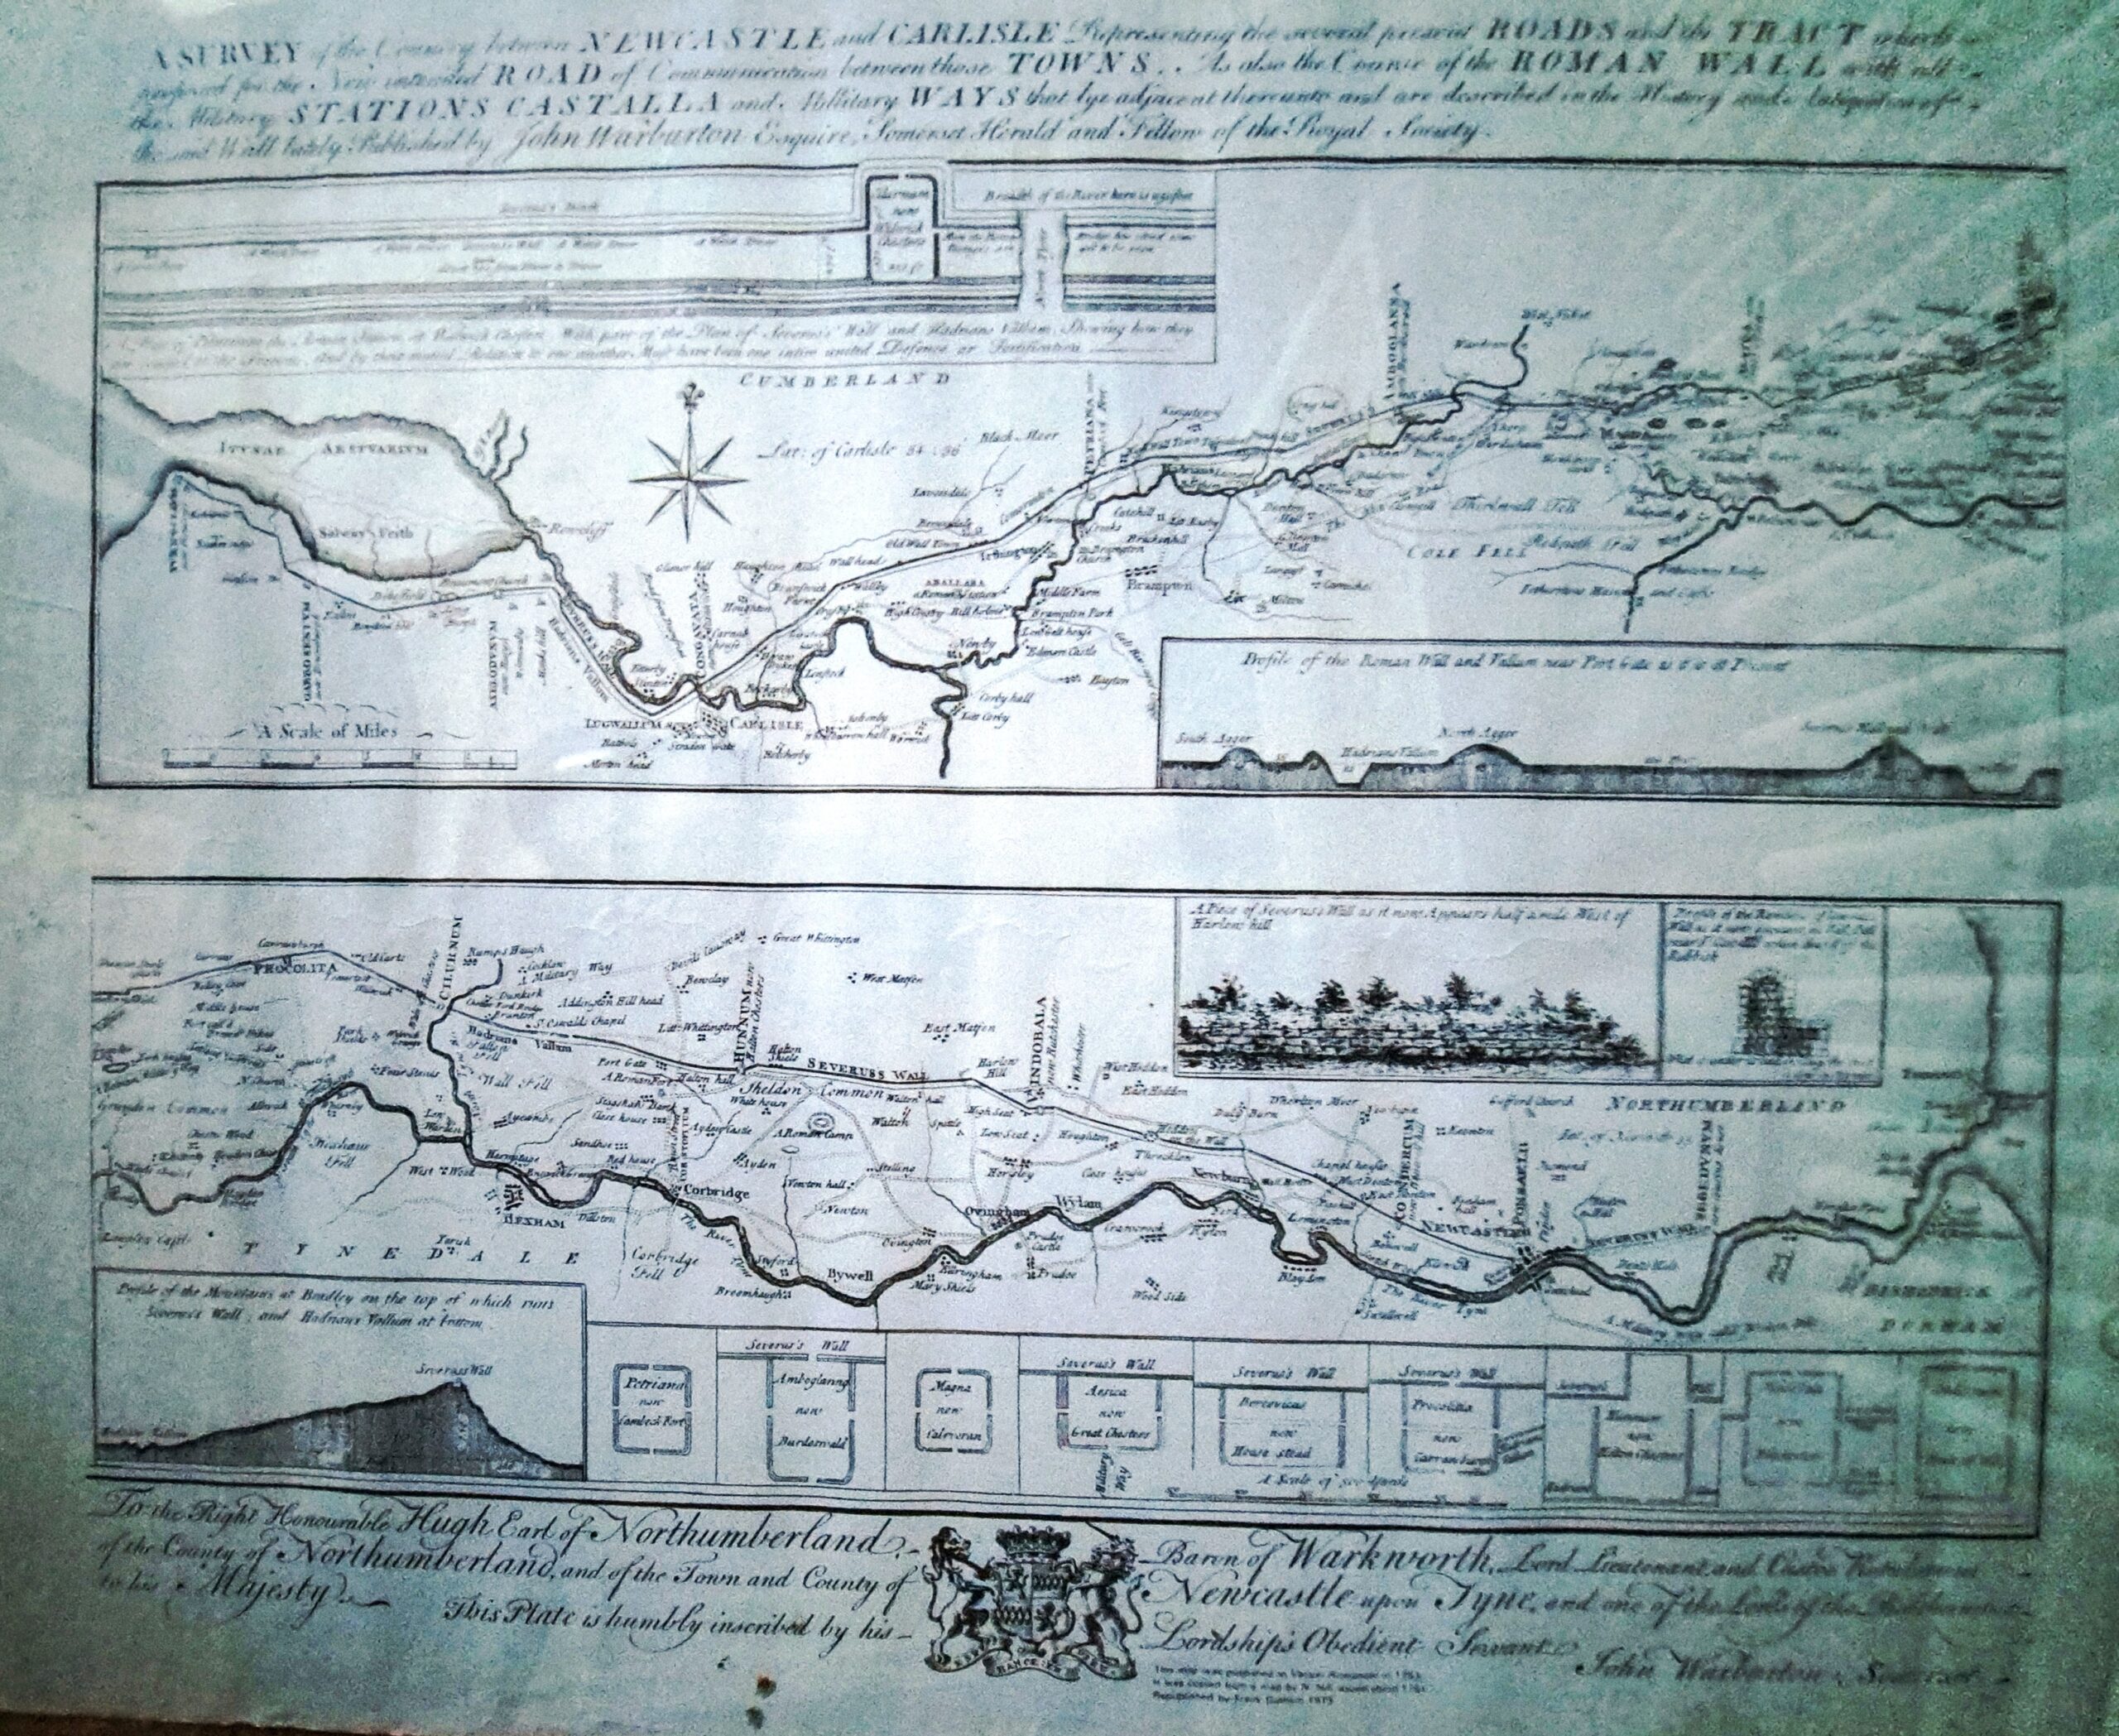 12 - Survey of the Route for the Proposed New Newcastle to Carlisle Road - 1753